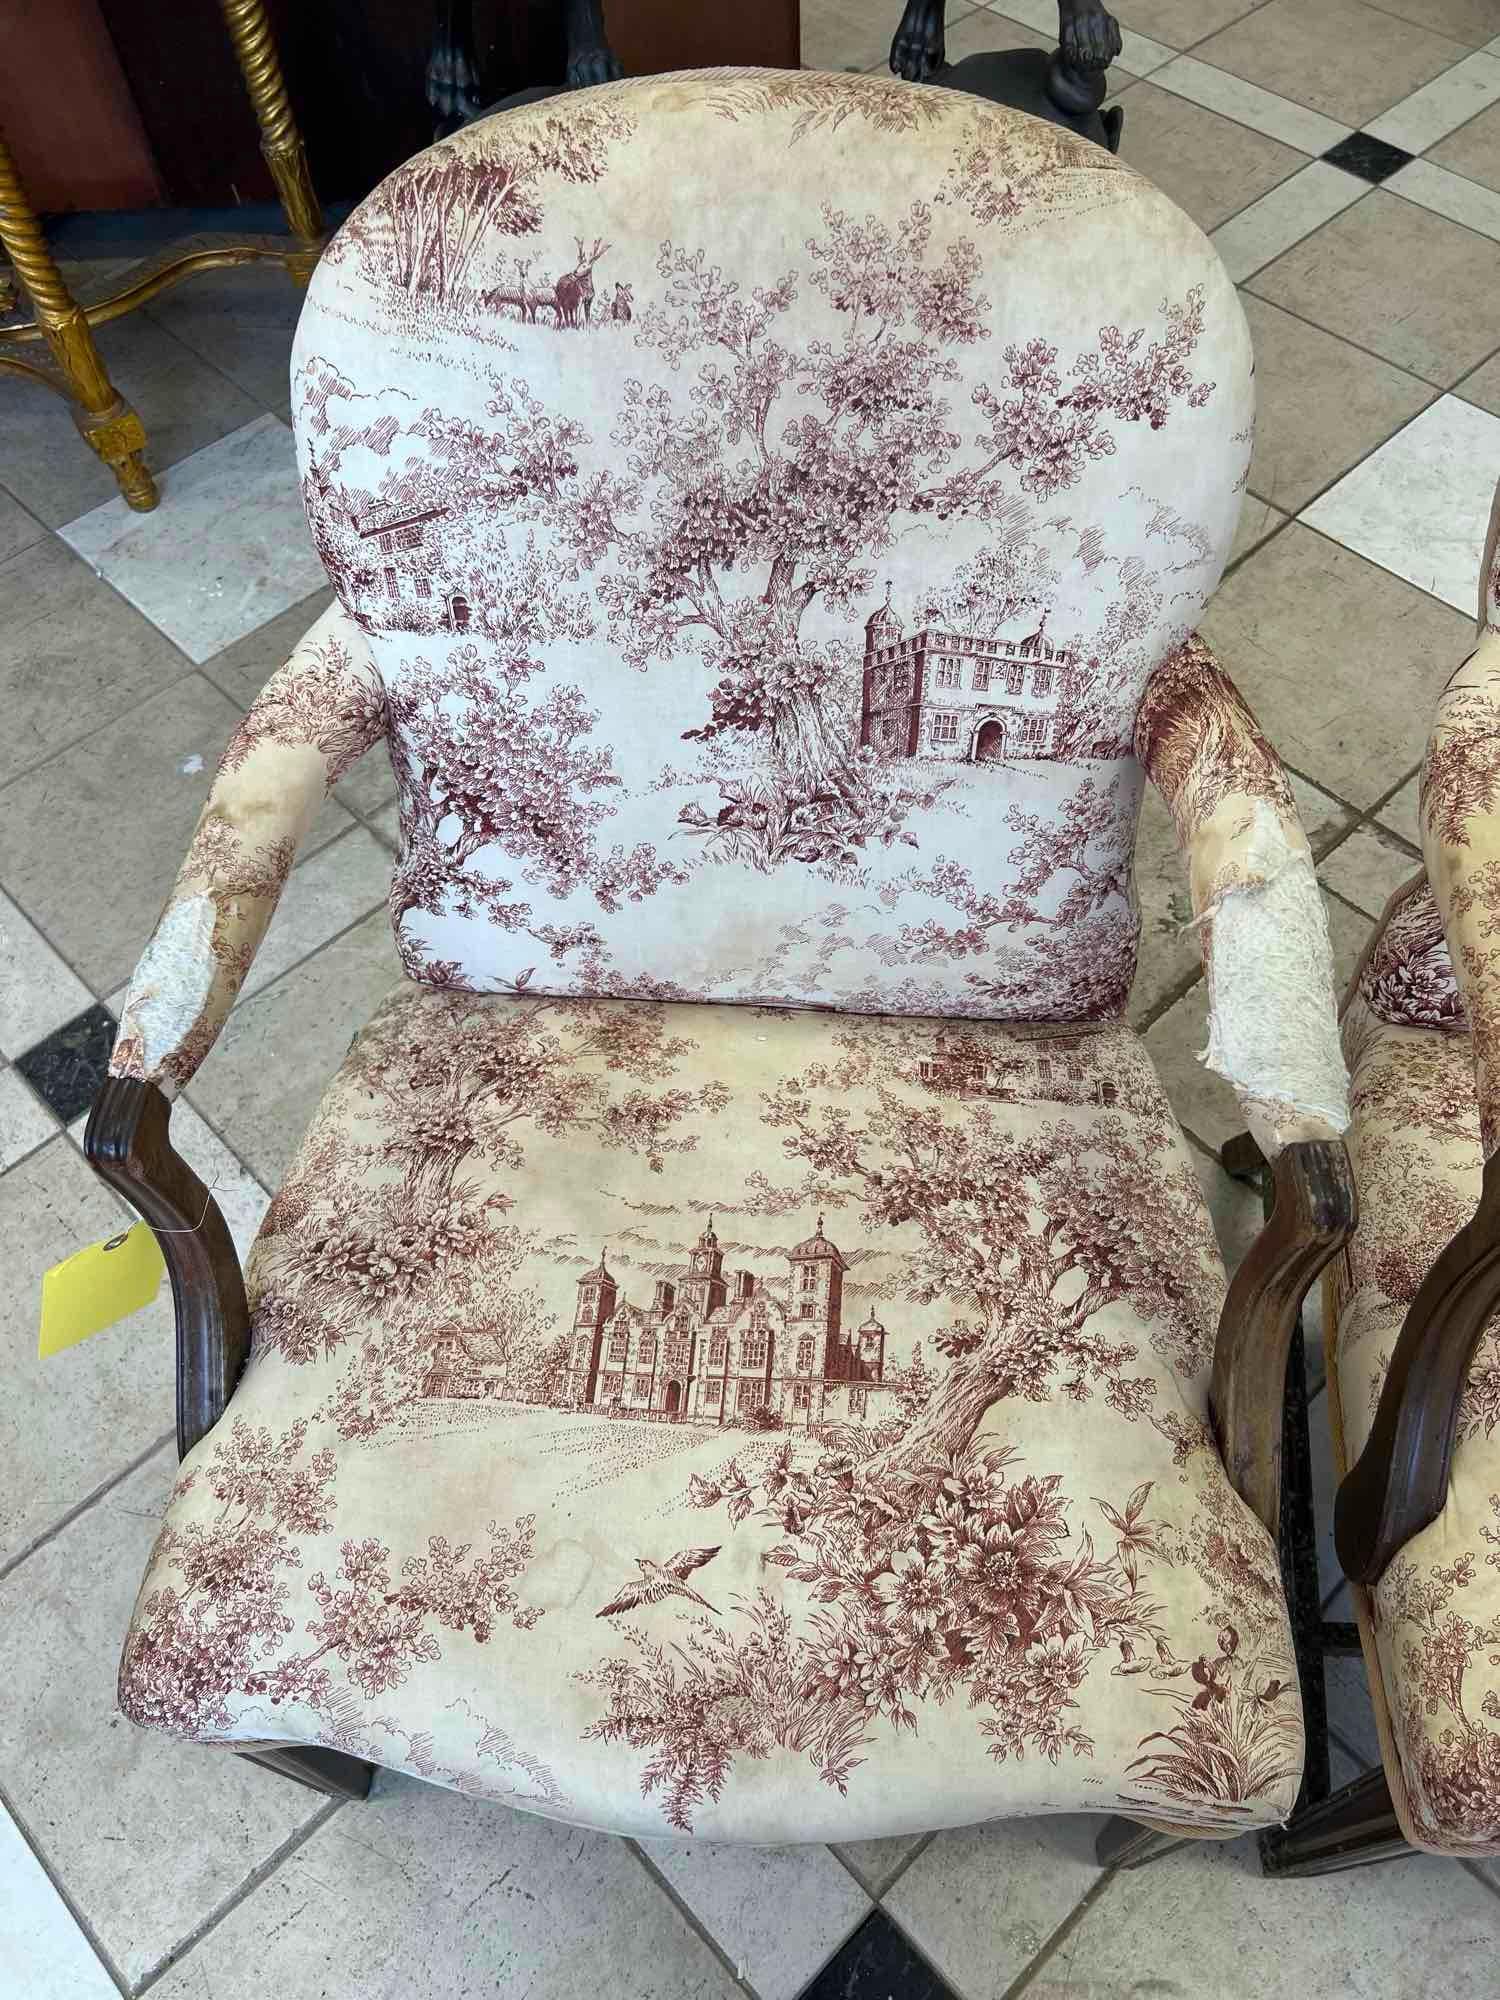 Pair of Early Upholstered Arm Chairs